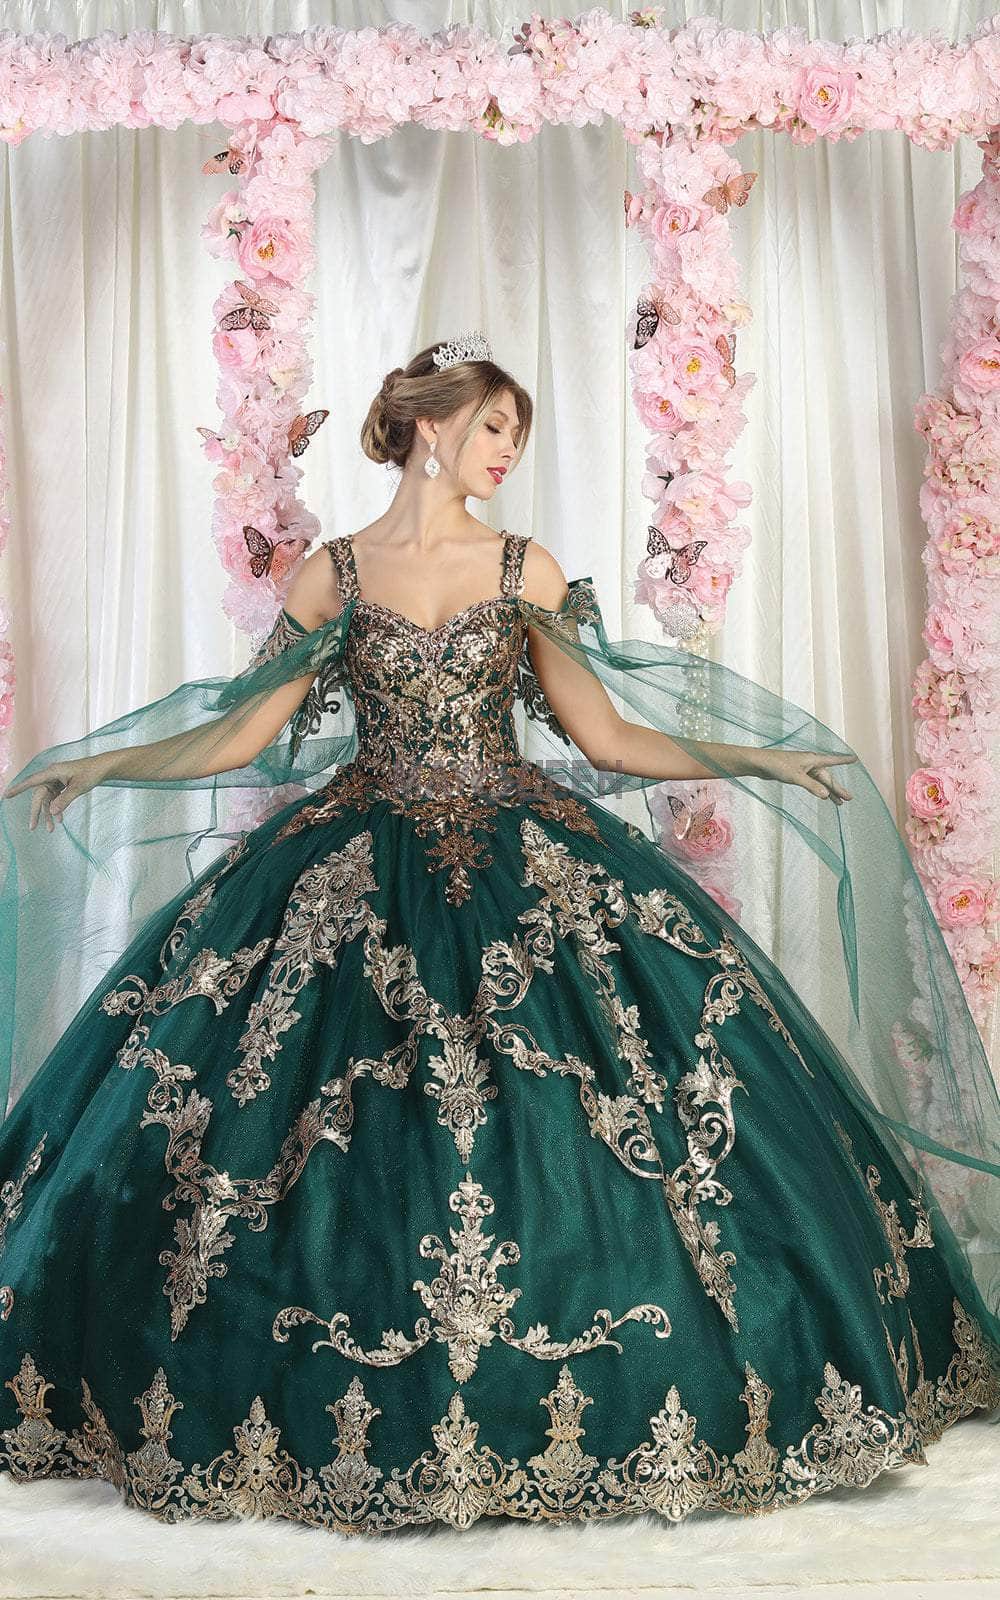 May Queen LK210 - Cold Shoulder Embellished Quinceanera Dress In Green and Gold